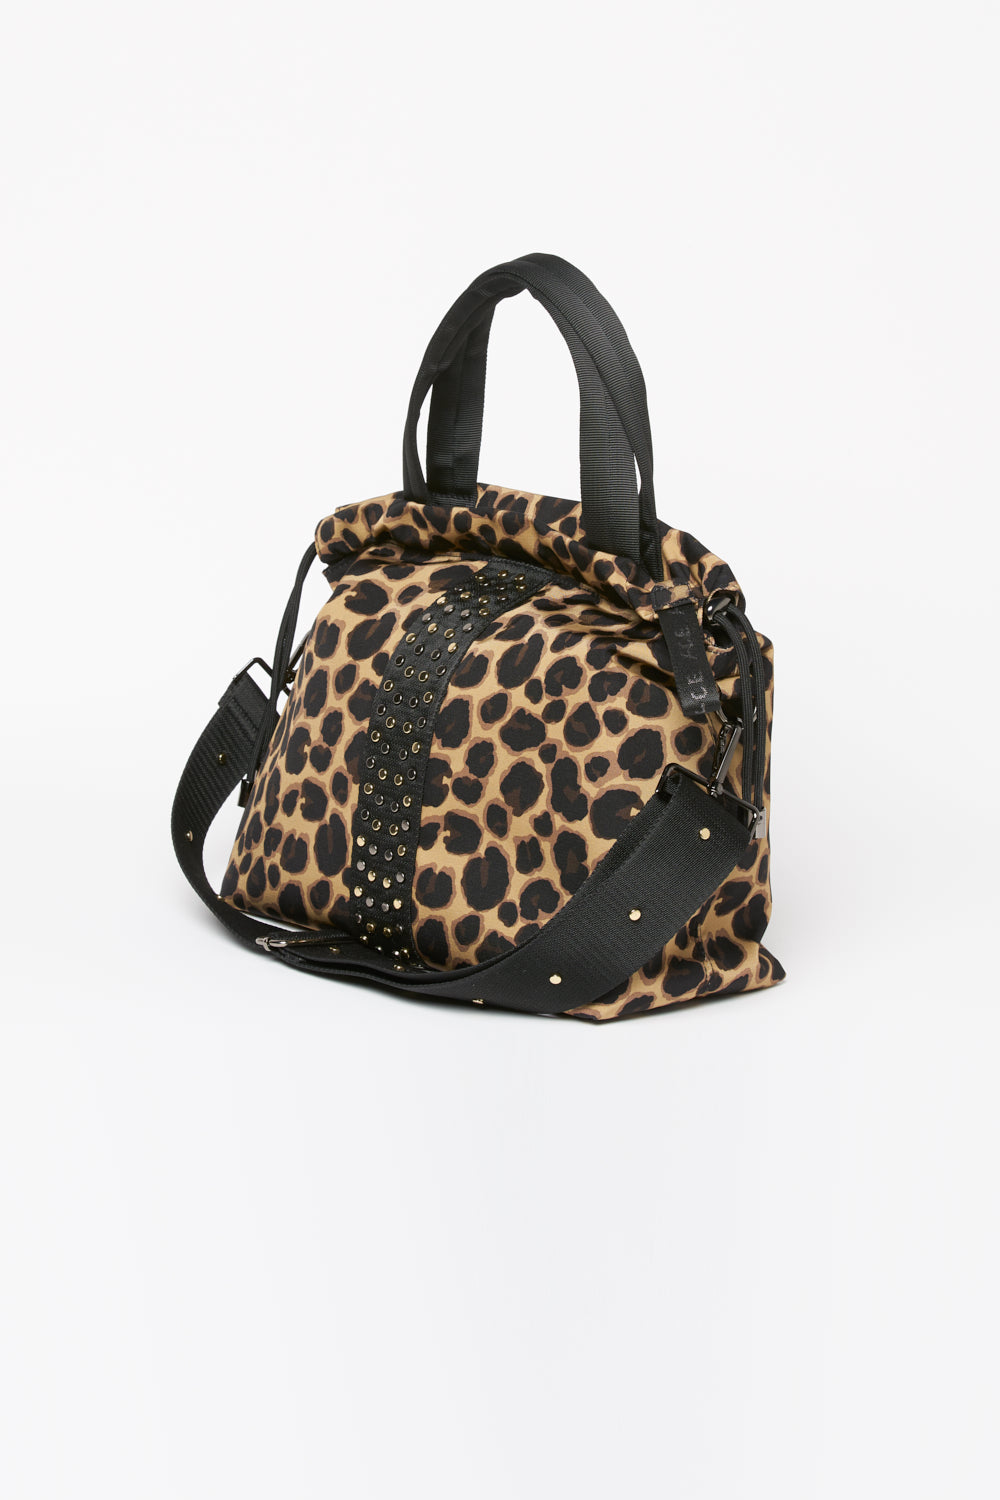 ACE Urban Tote Bag Leopard side view